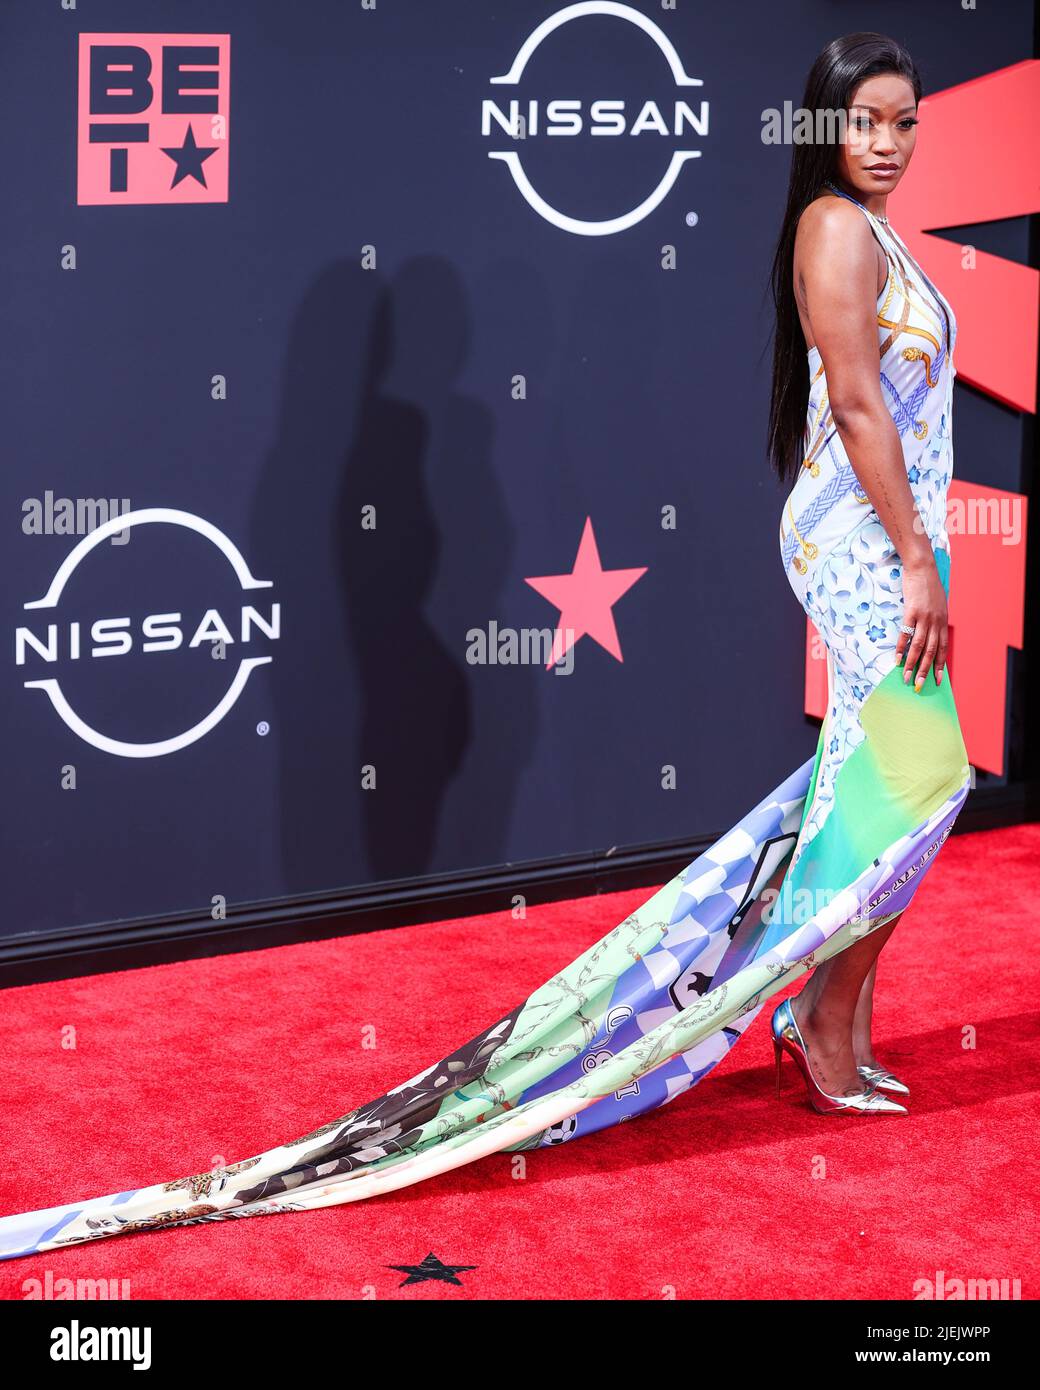 LOS ANGELES, CALIFORNIA, USA - JUNE 26: American actress Keke Palmer wearing a Conner Ives dress arrives at the BET Awards 2022 held at Microsoft Theater at L.A. Live on June 26, 2022 in Los Angeles, California, United States. (Photo by Xavier Collin/Image Press Agency) Credit: Image Press Agency/Alamy Live News Stock Photo